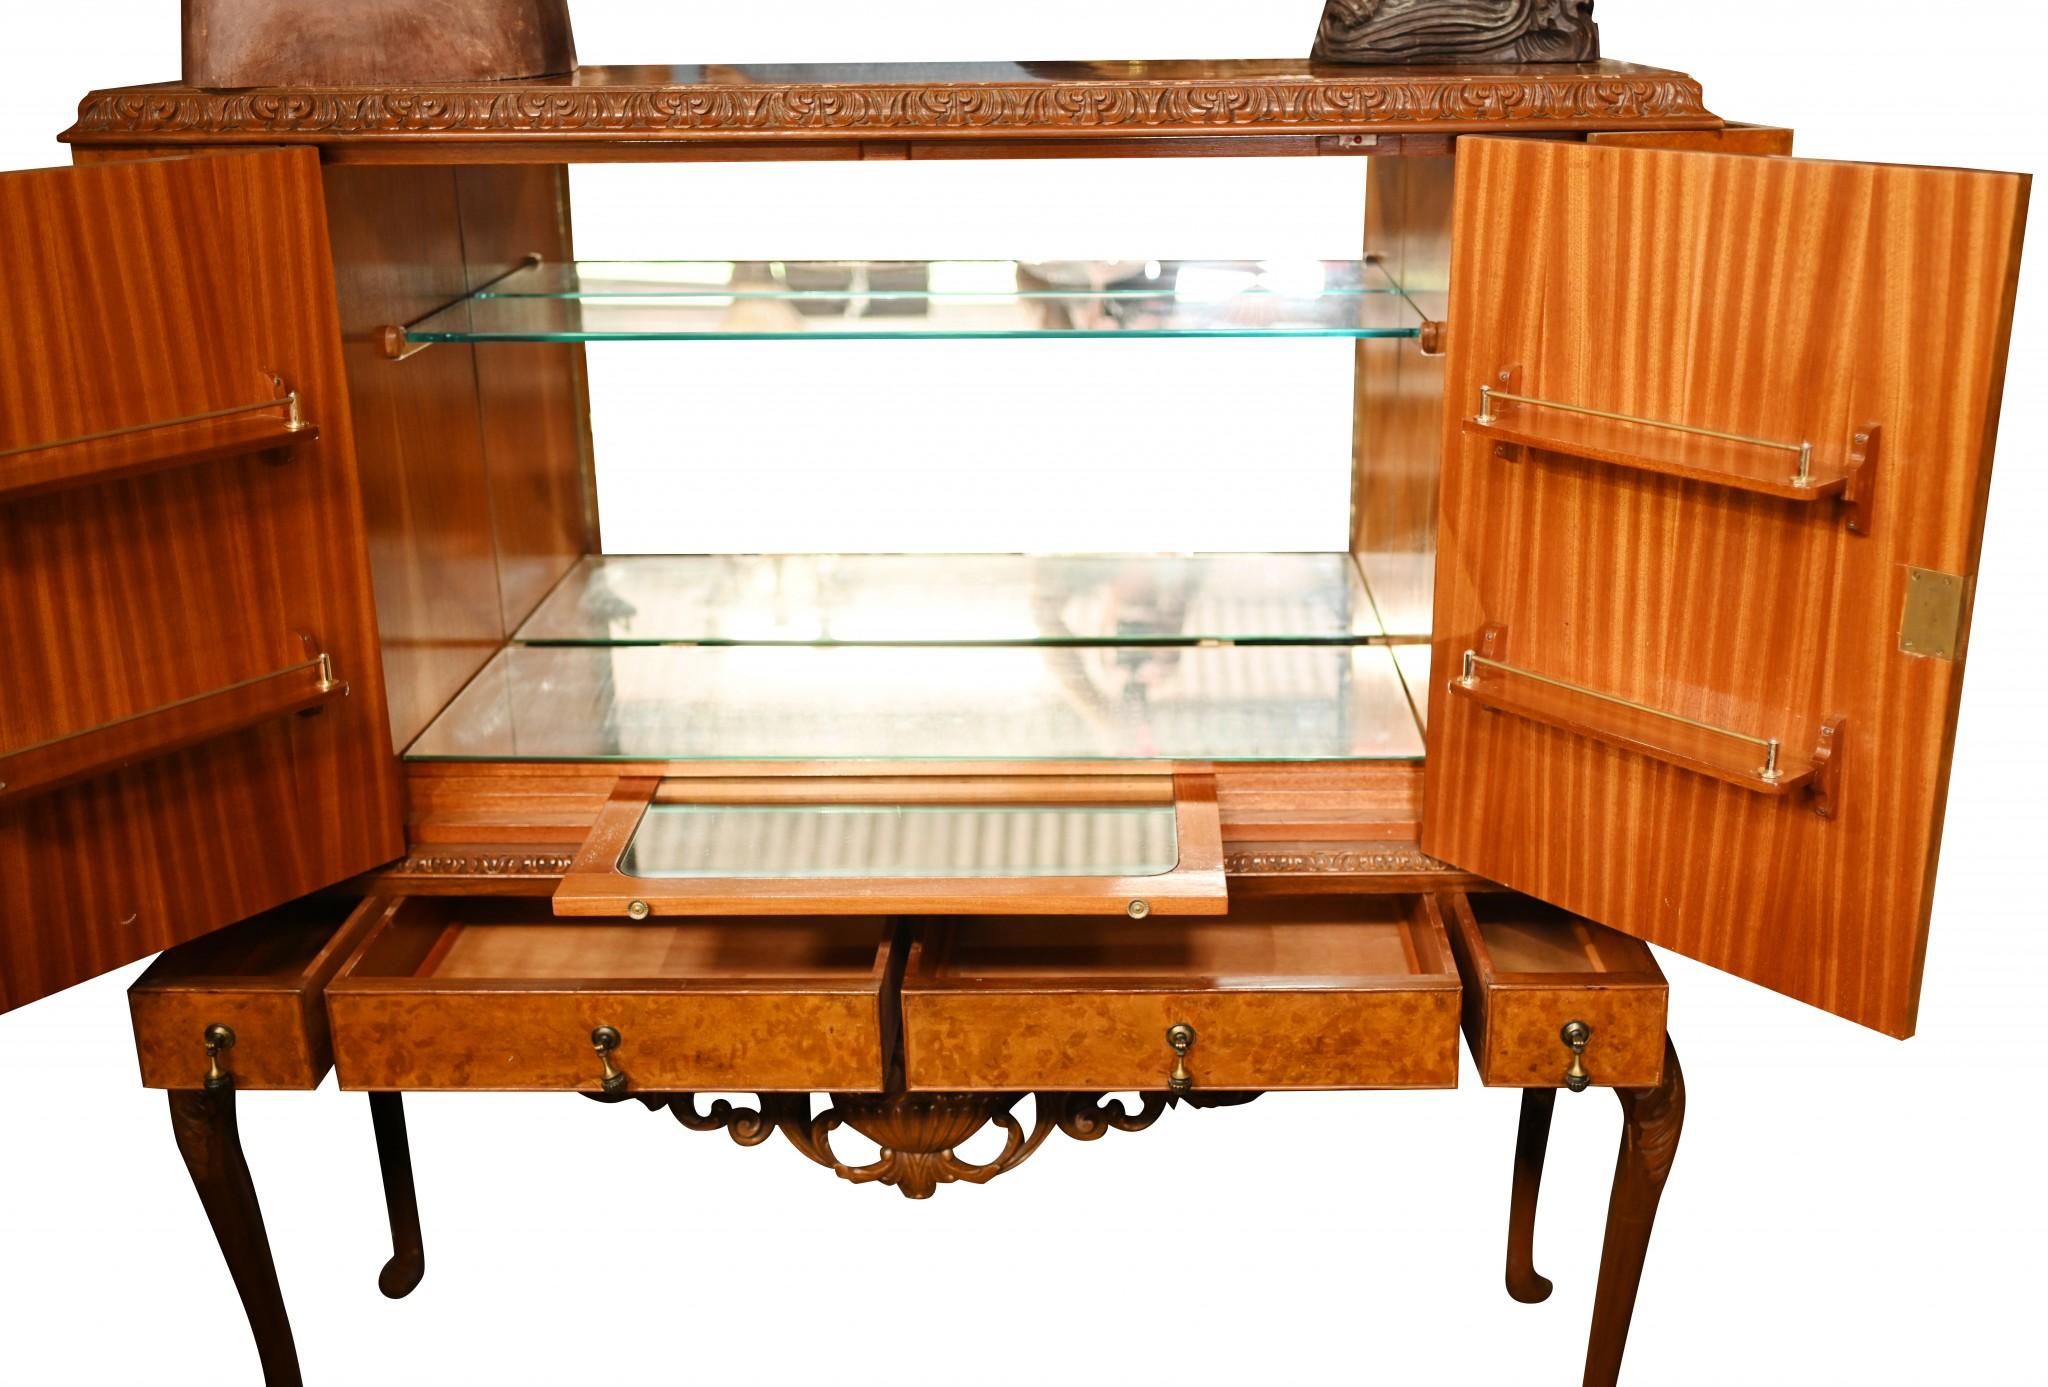 Gorgeous period 1930s Epstein cocktail cabinet
Hand crafted from walnut with ormolu fixtures
Features four compartments
Big piece with lots of storage
Top features the mirror lined drinks making section.

